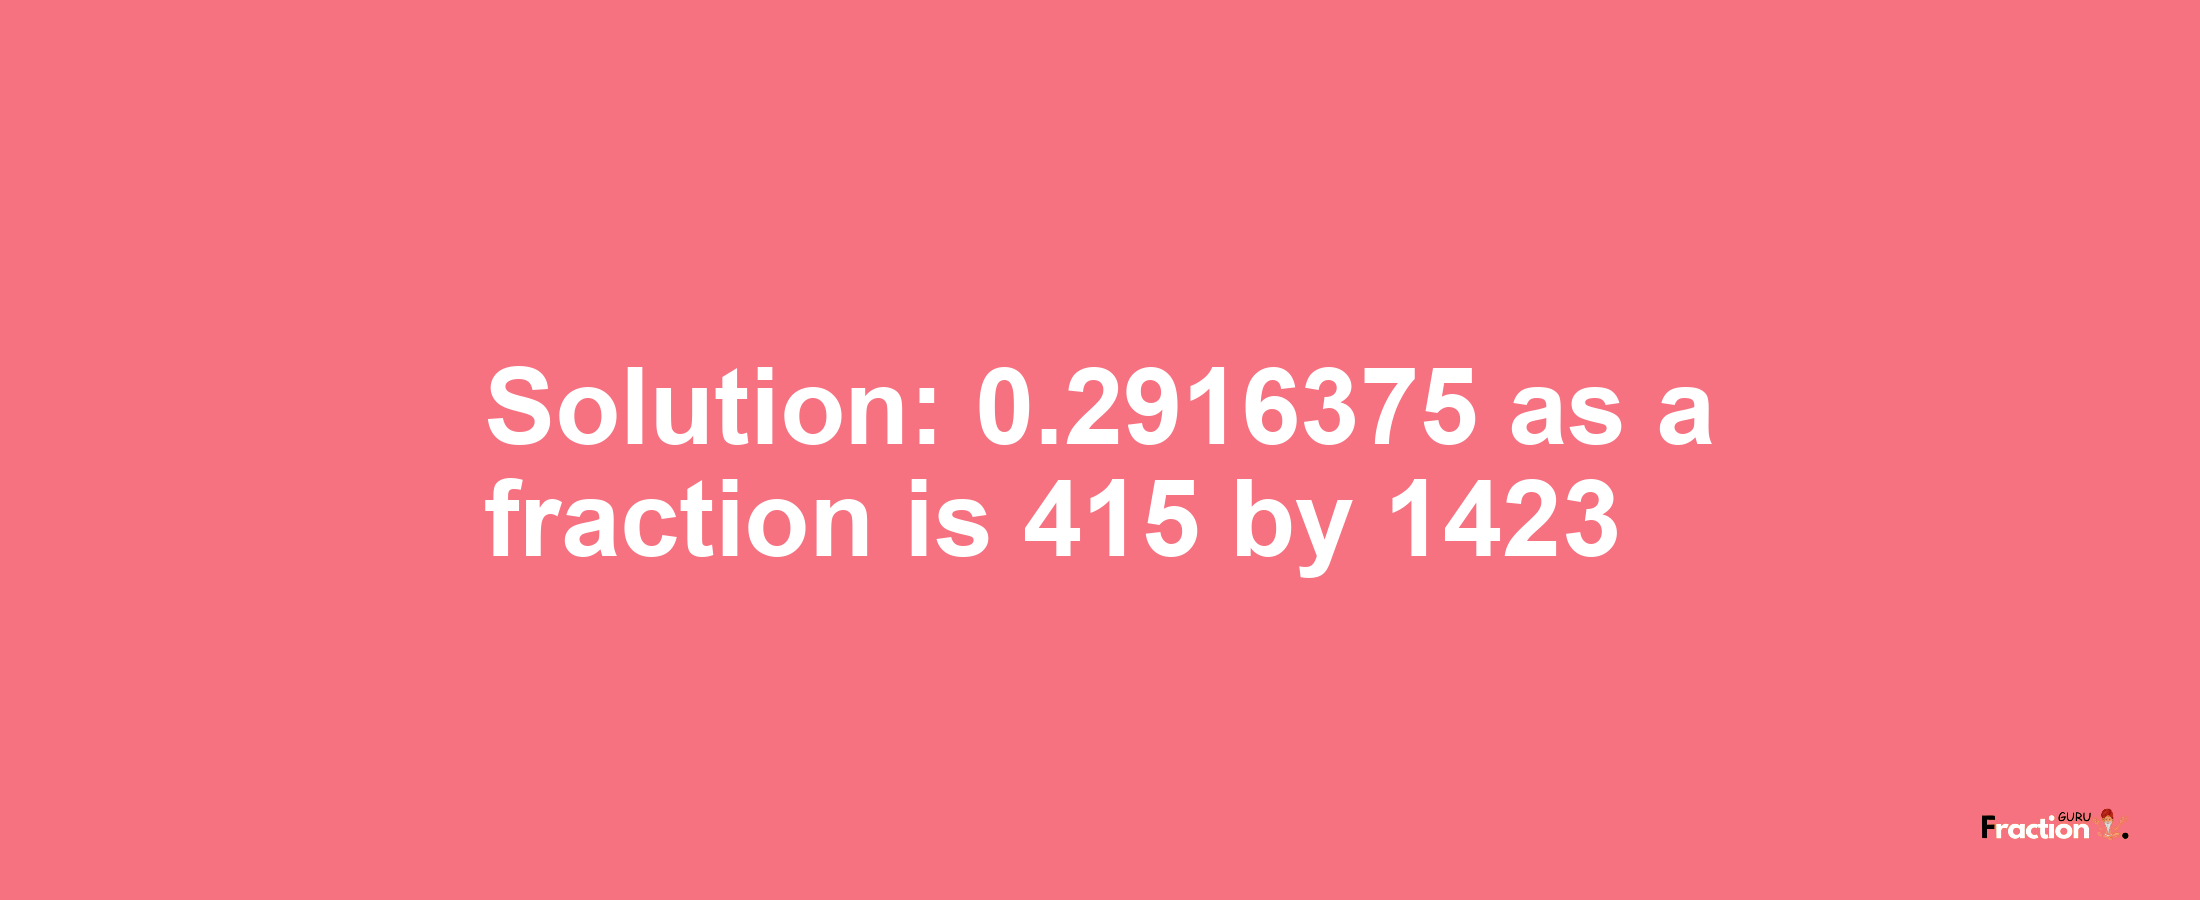 Solution:0.2916375 as a fraction is 415/1423